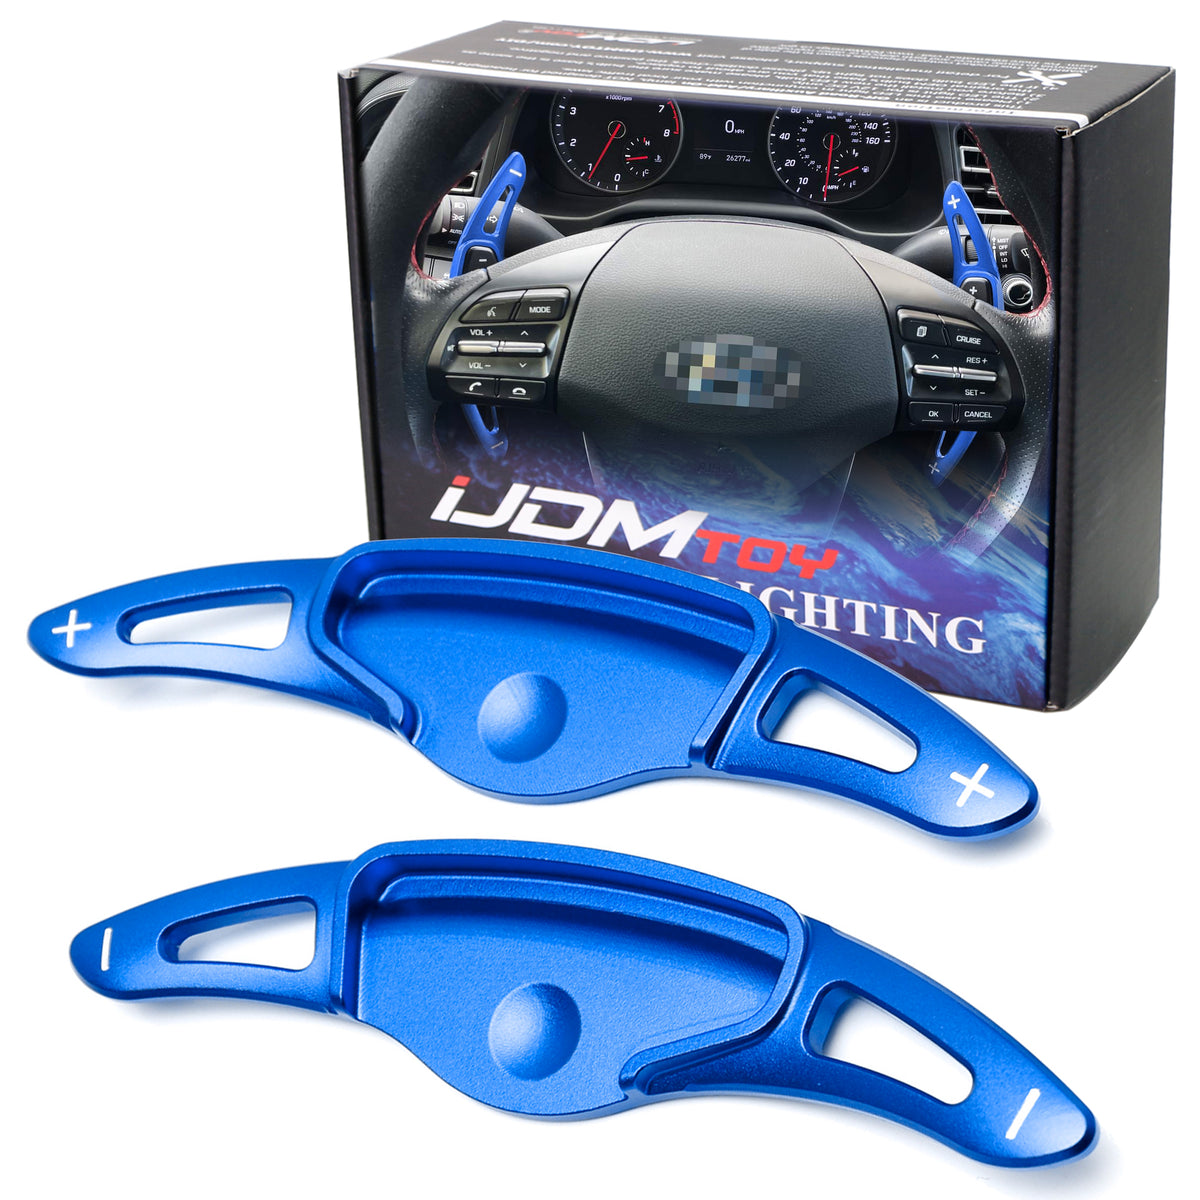 Red Steering Wheel Larger Paddle Shifter Extension Covers For Jaguar Land  Rover — iJDMTOY.com